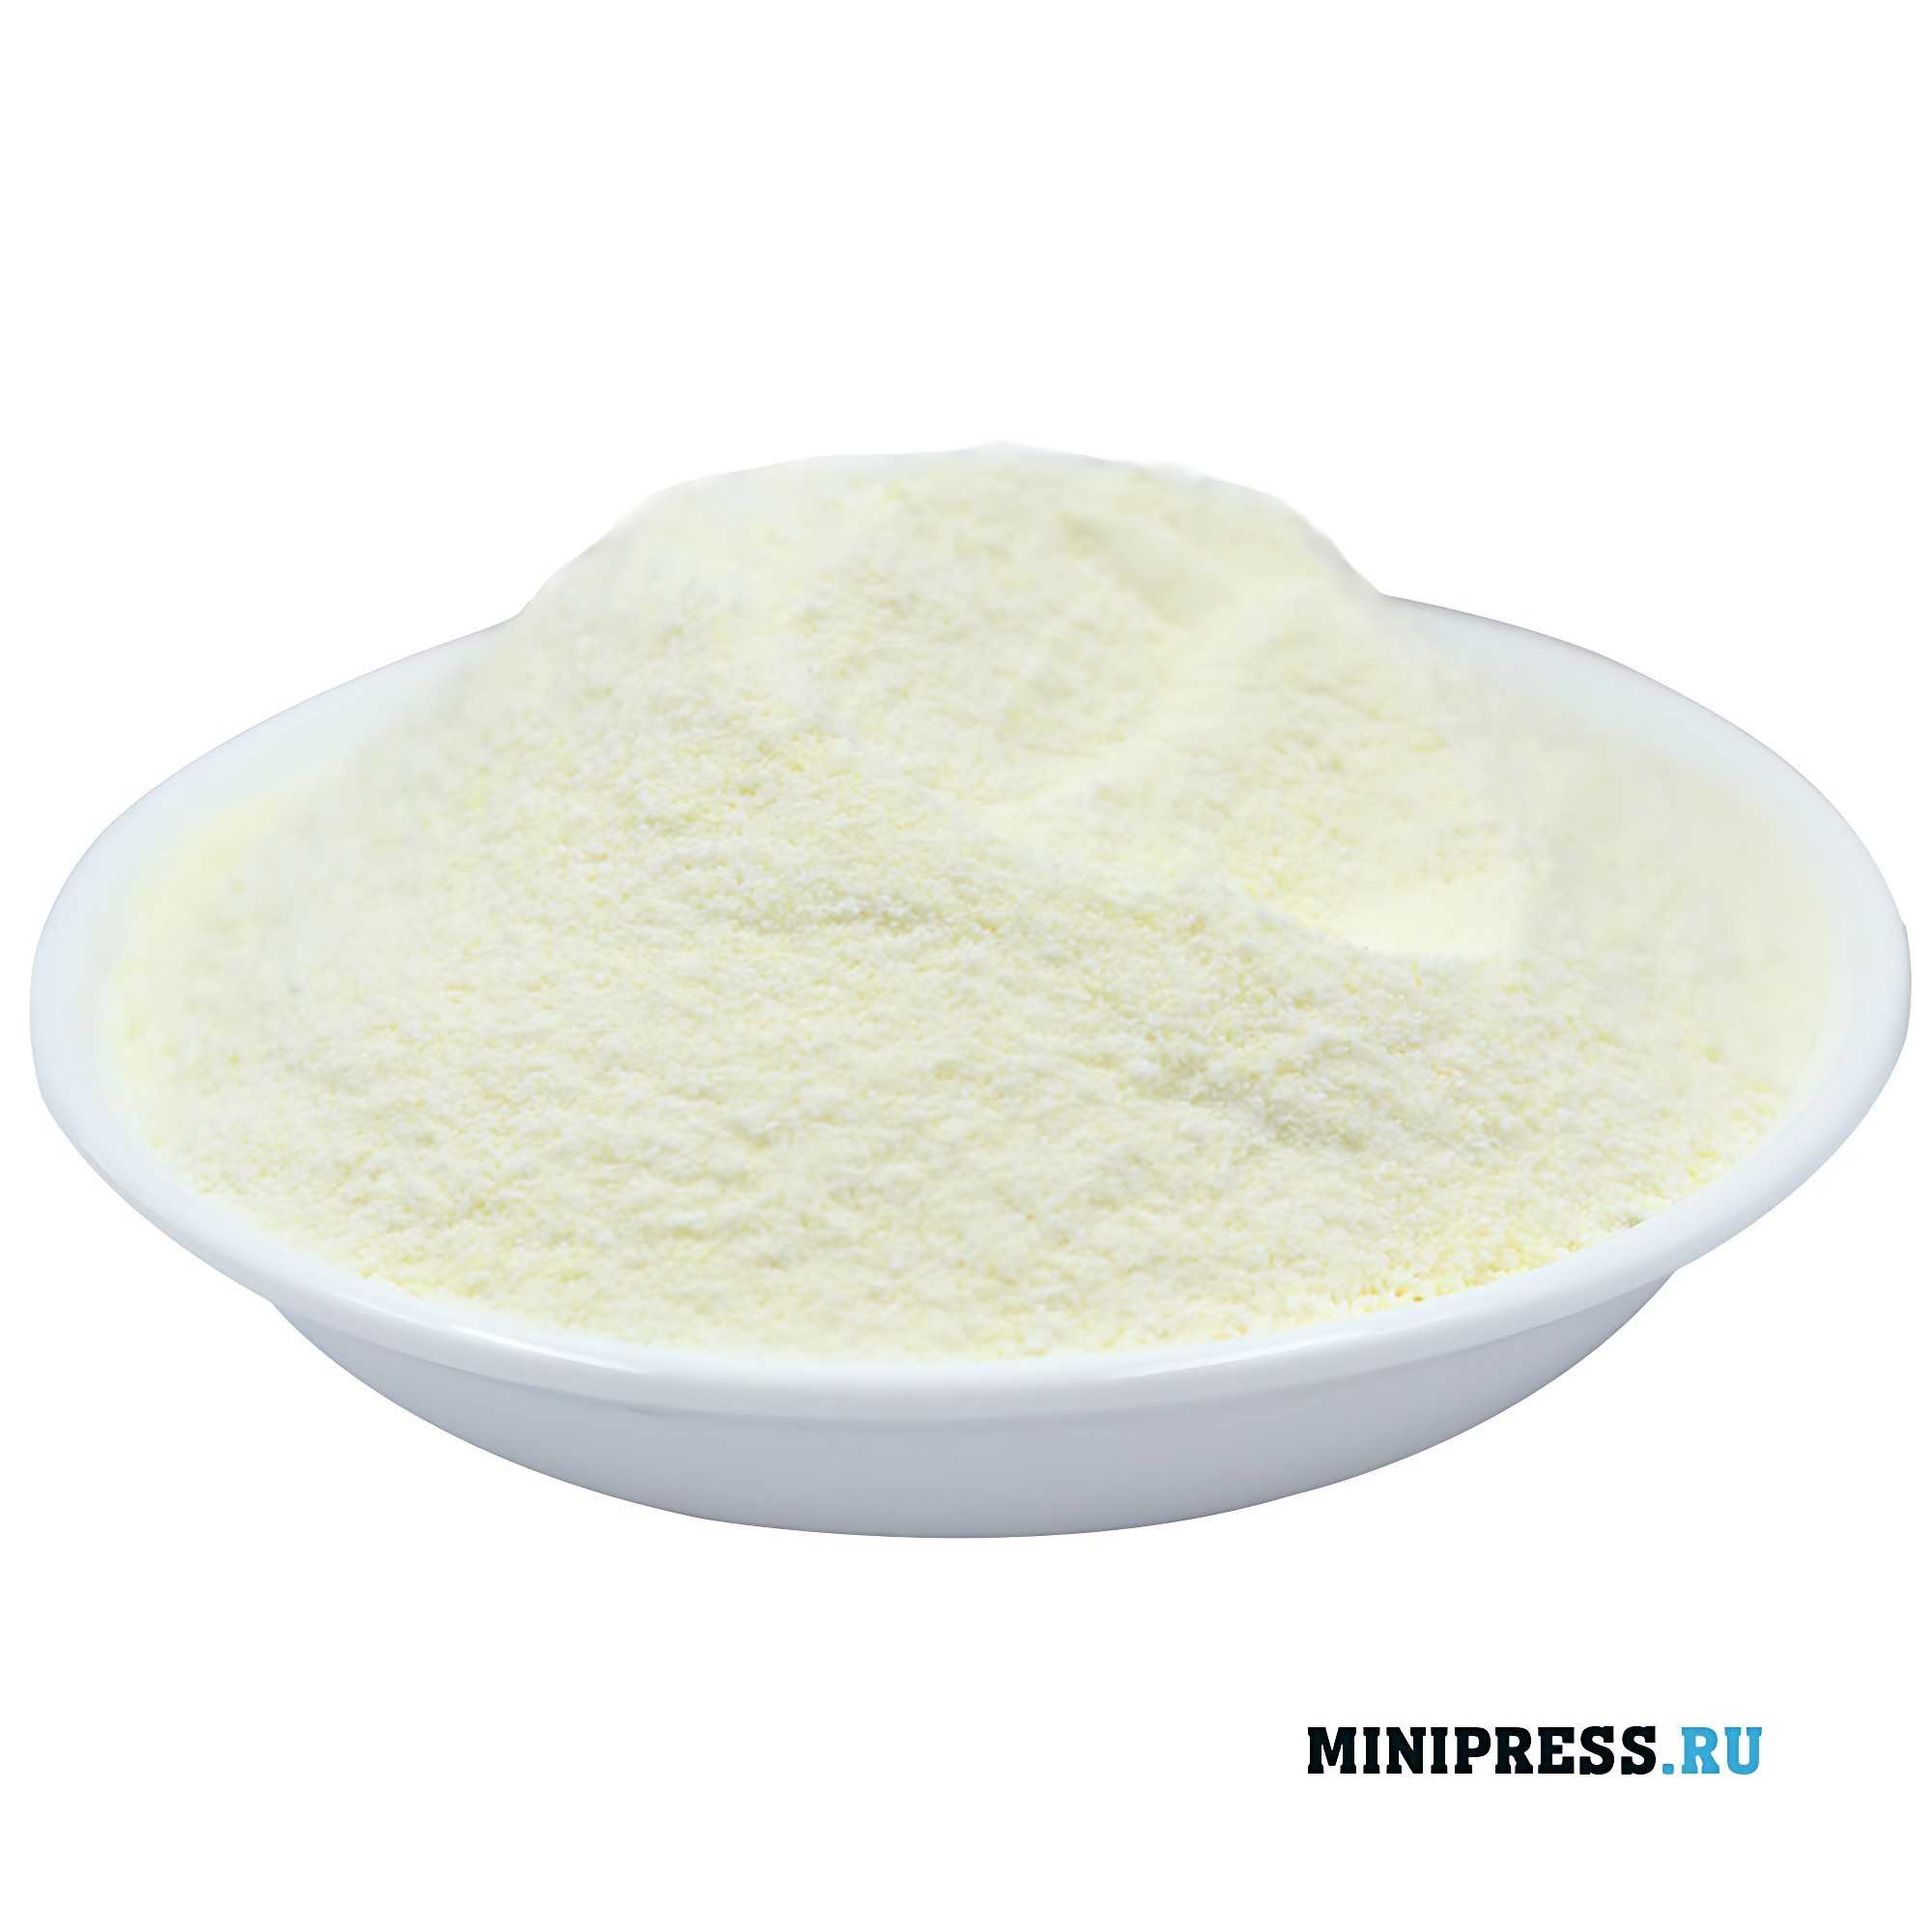 Manufacture of powders